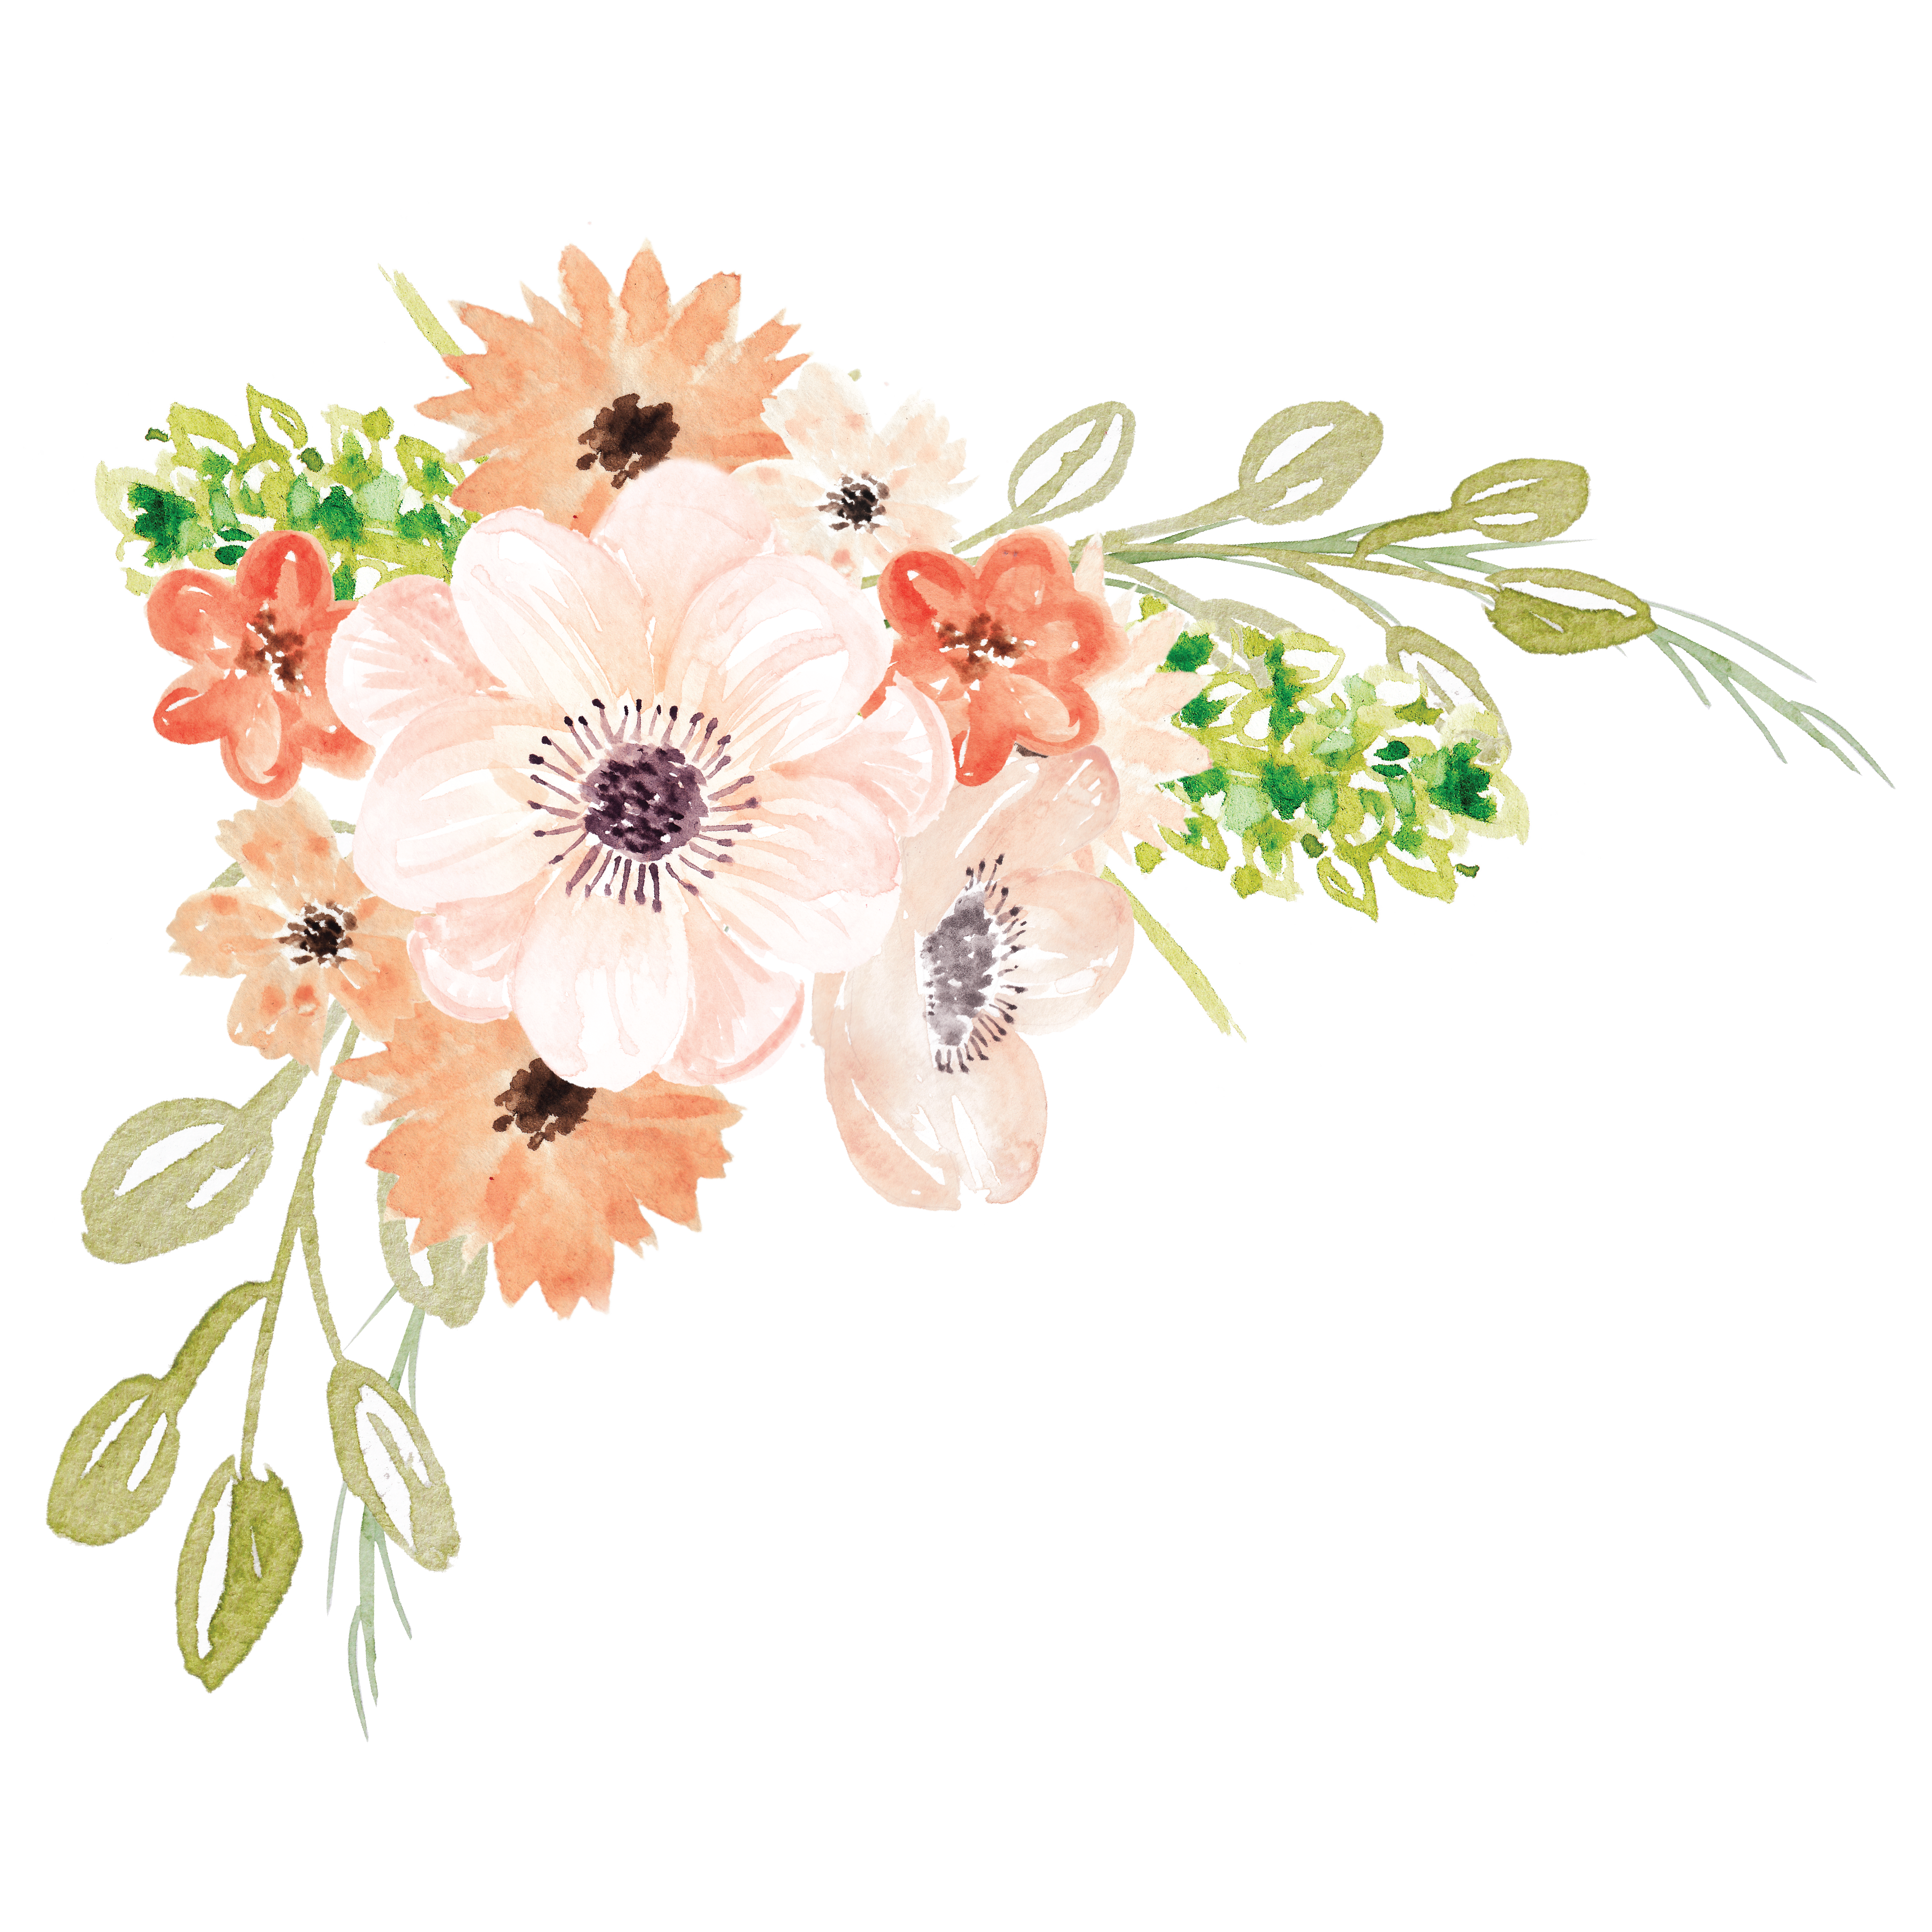 Watercolor Flowers Flower Painting Free Transparent Image HD Clipart